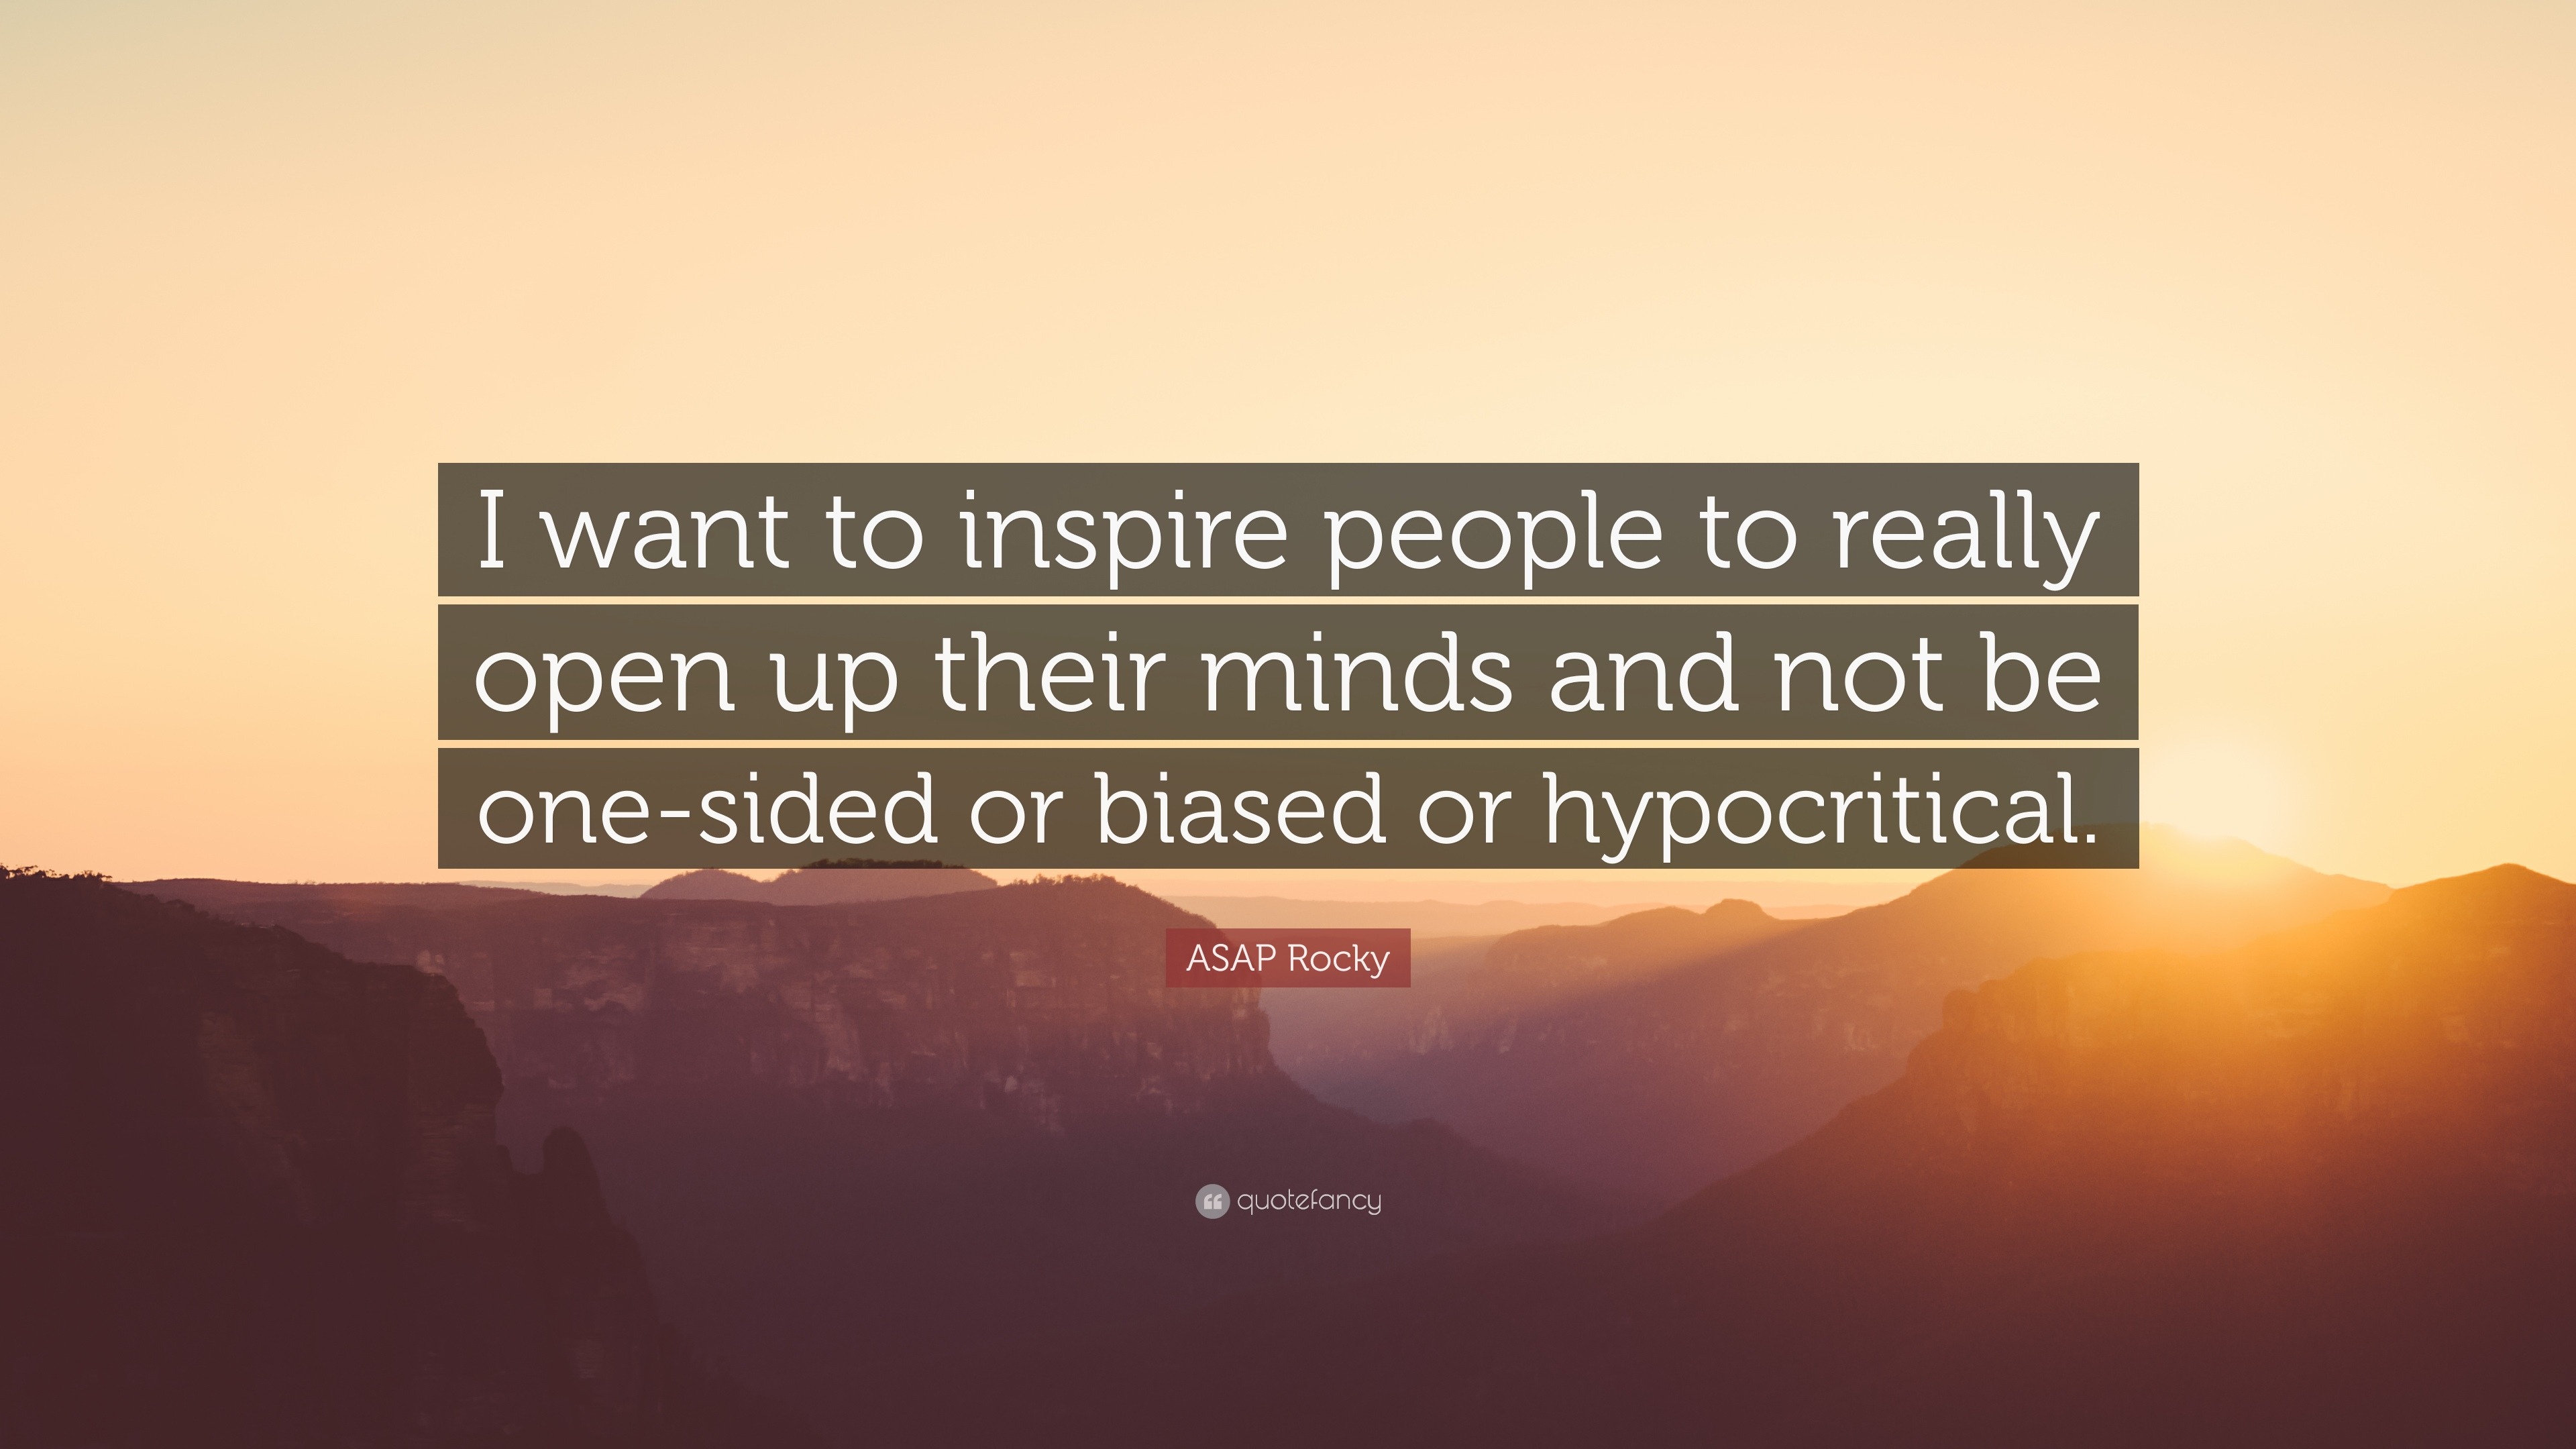 ASAP Rocky Quote: "I want to inspire people to really open up their minds and not be one-sided ...